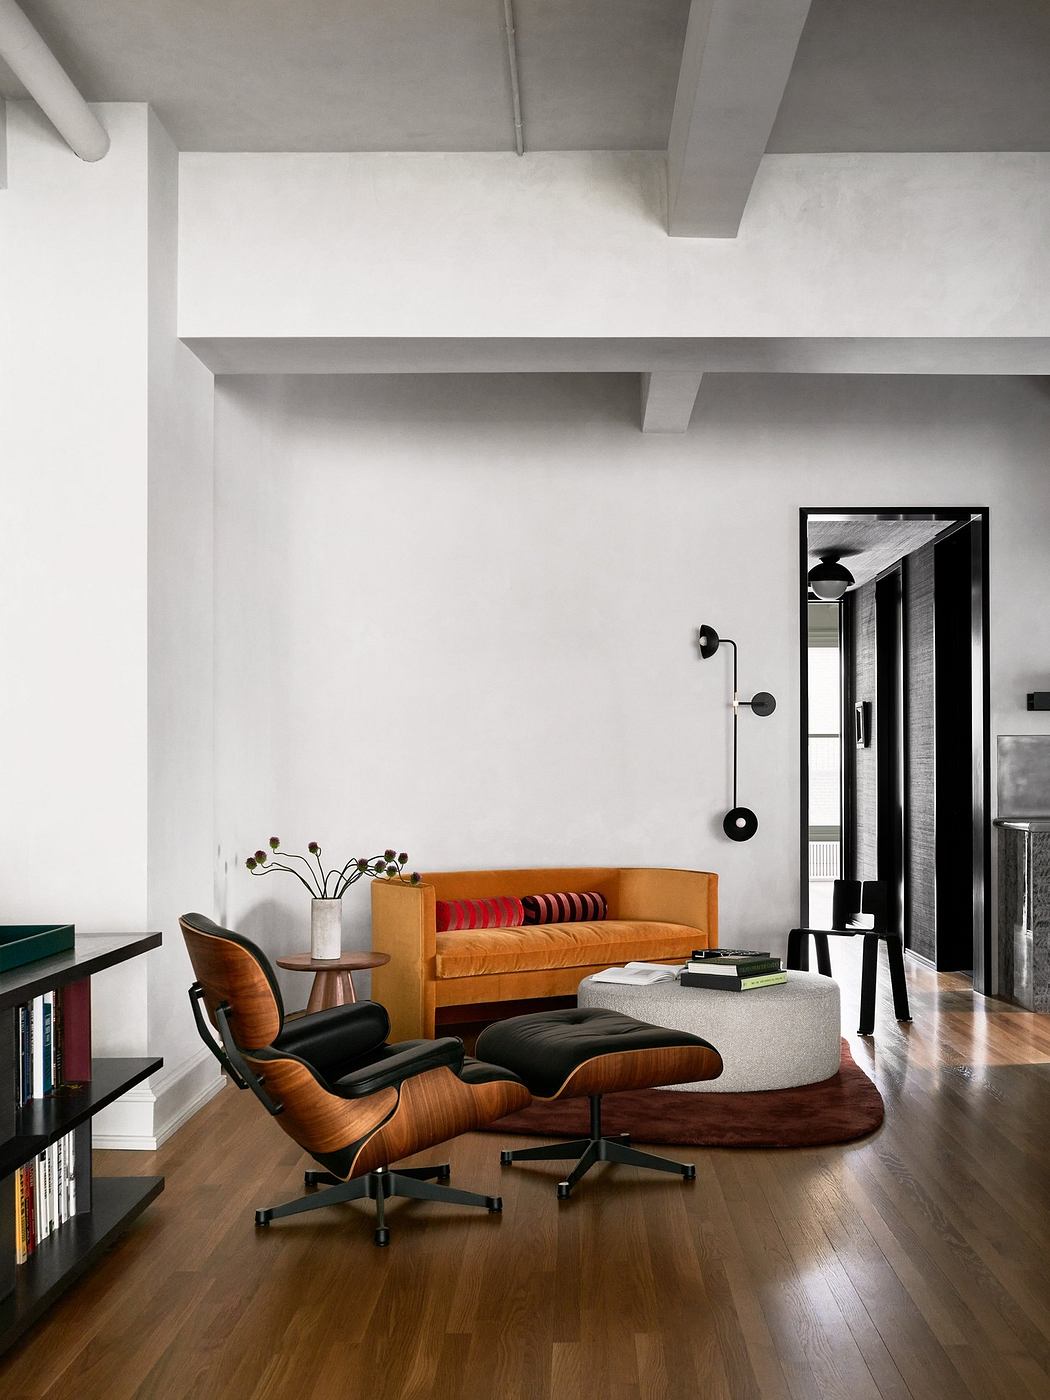 Sleek interior with a classic Eames chair, white walls, and polished